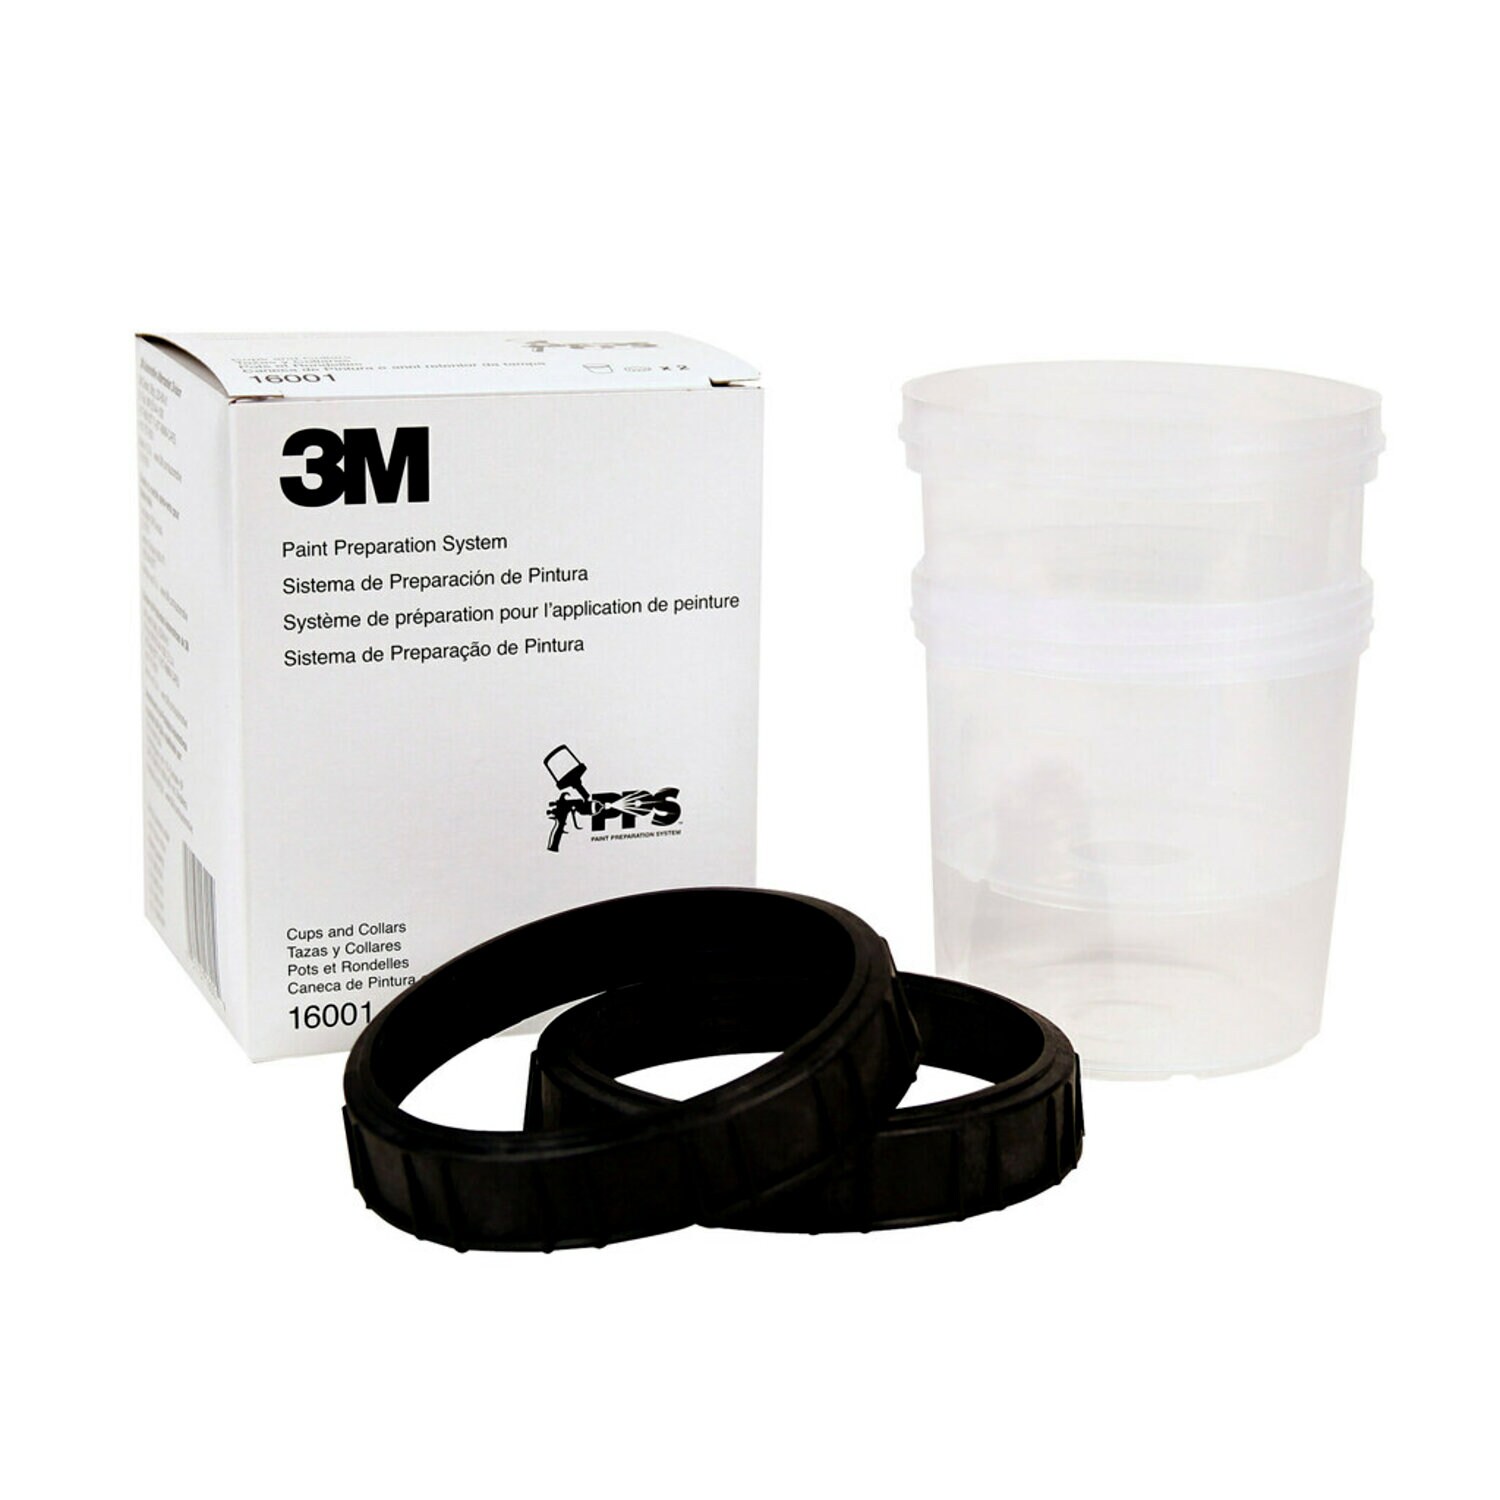 https://www.e-aircraftsupply.com/ItemImages/84/1849858E_3m-pps-spray-gun-cup-and-collar-16001-standard-22-ounces-pack-of-4-catalog-image.jpg